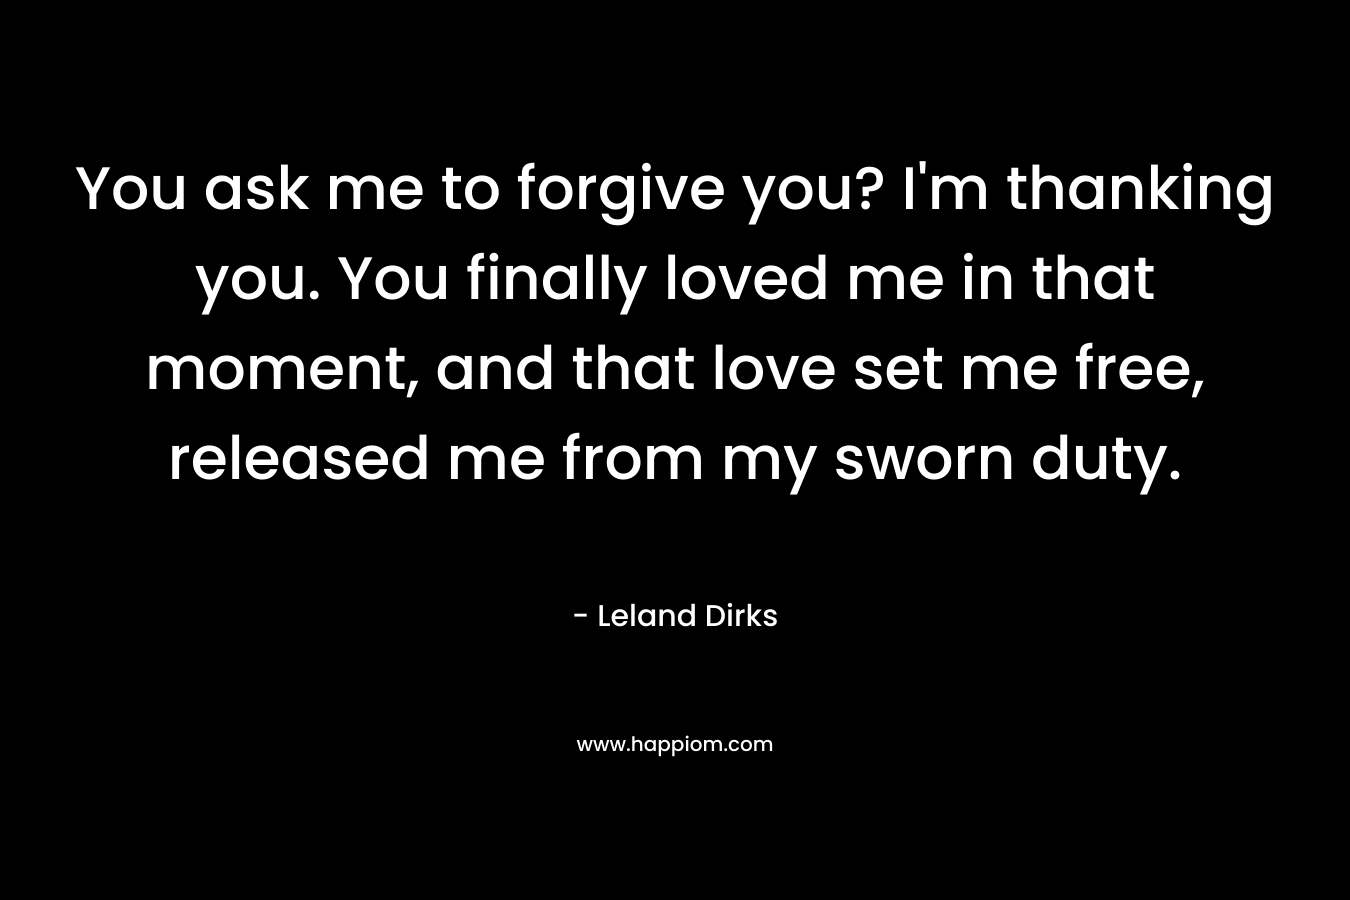 You ask me to forgive you? I’m thanking you. You finally loved me in that moment, and that love set me free, released me from my sworn duty. – Leland Dirks